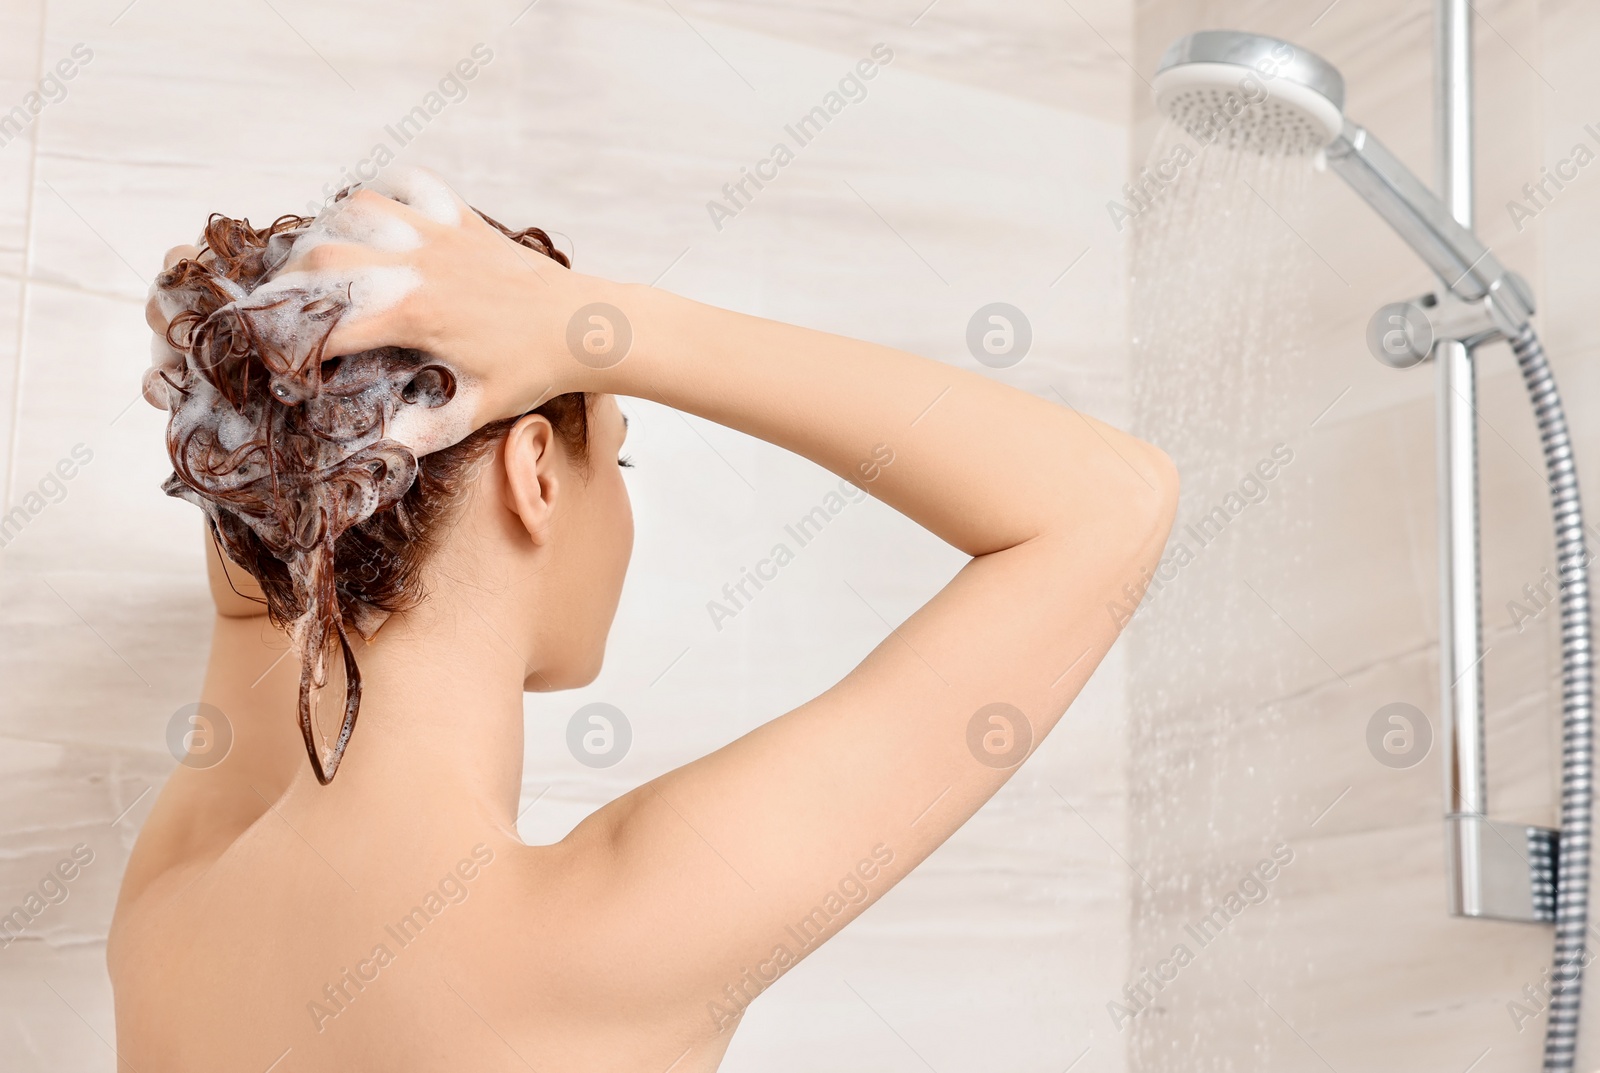 Photo of Young woman washing her hair with shampoo in shower, back view